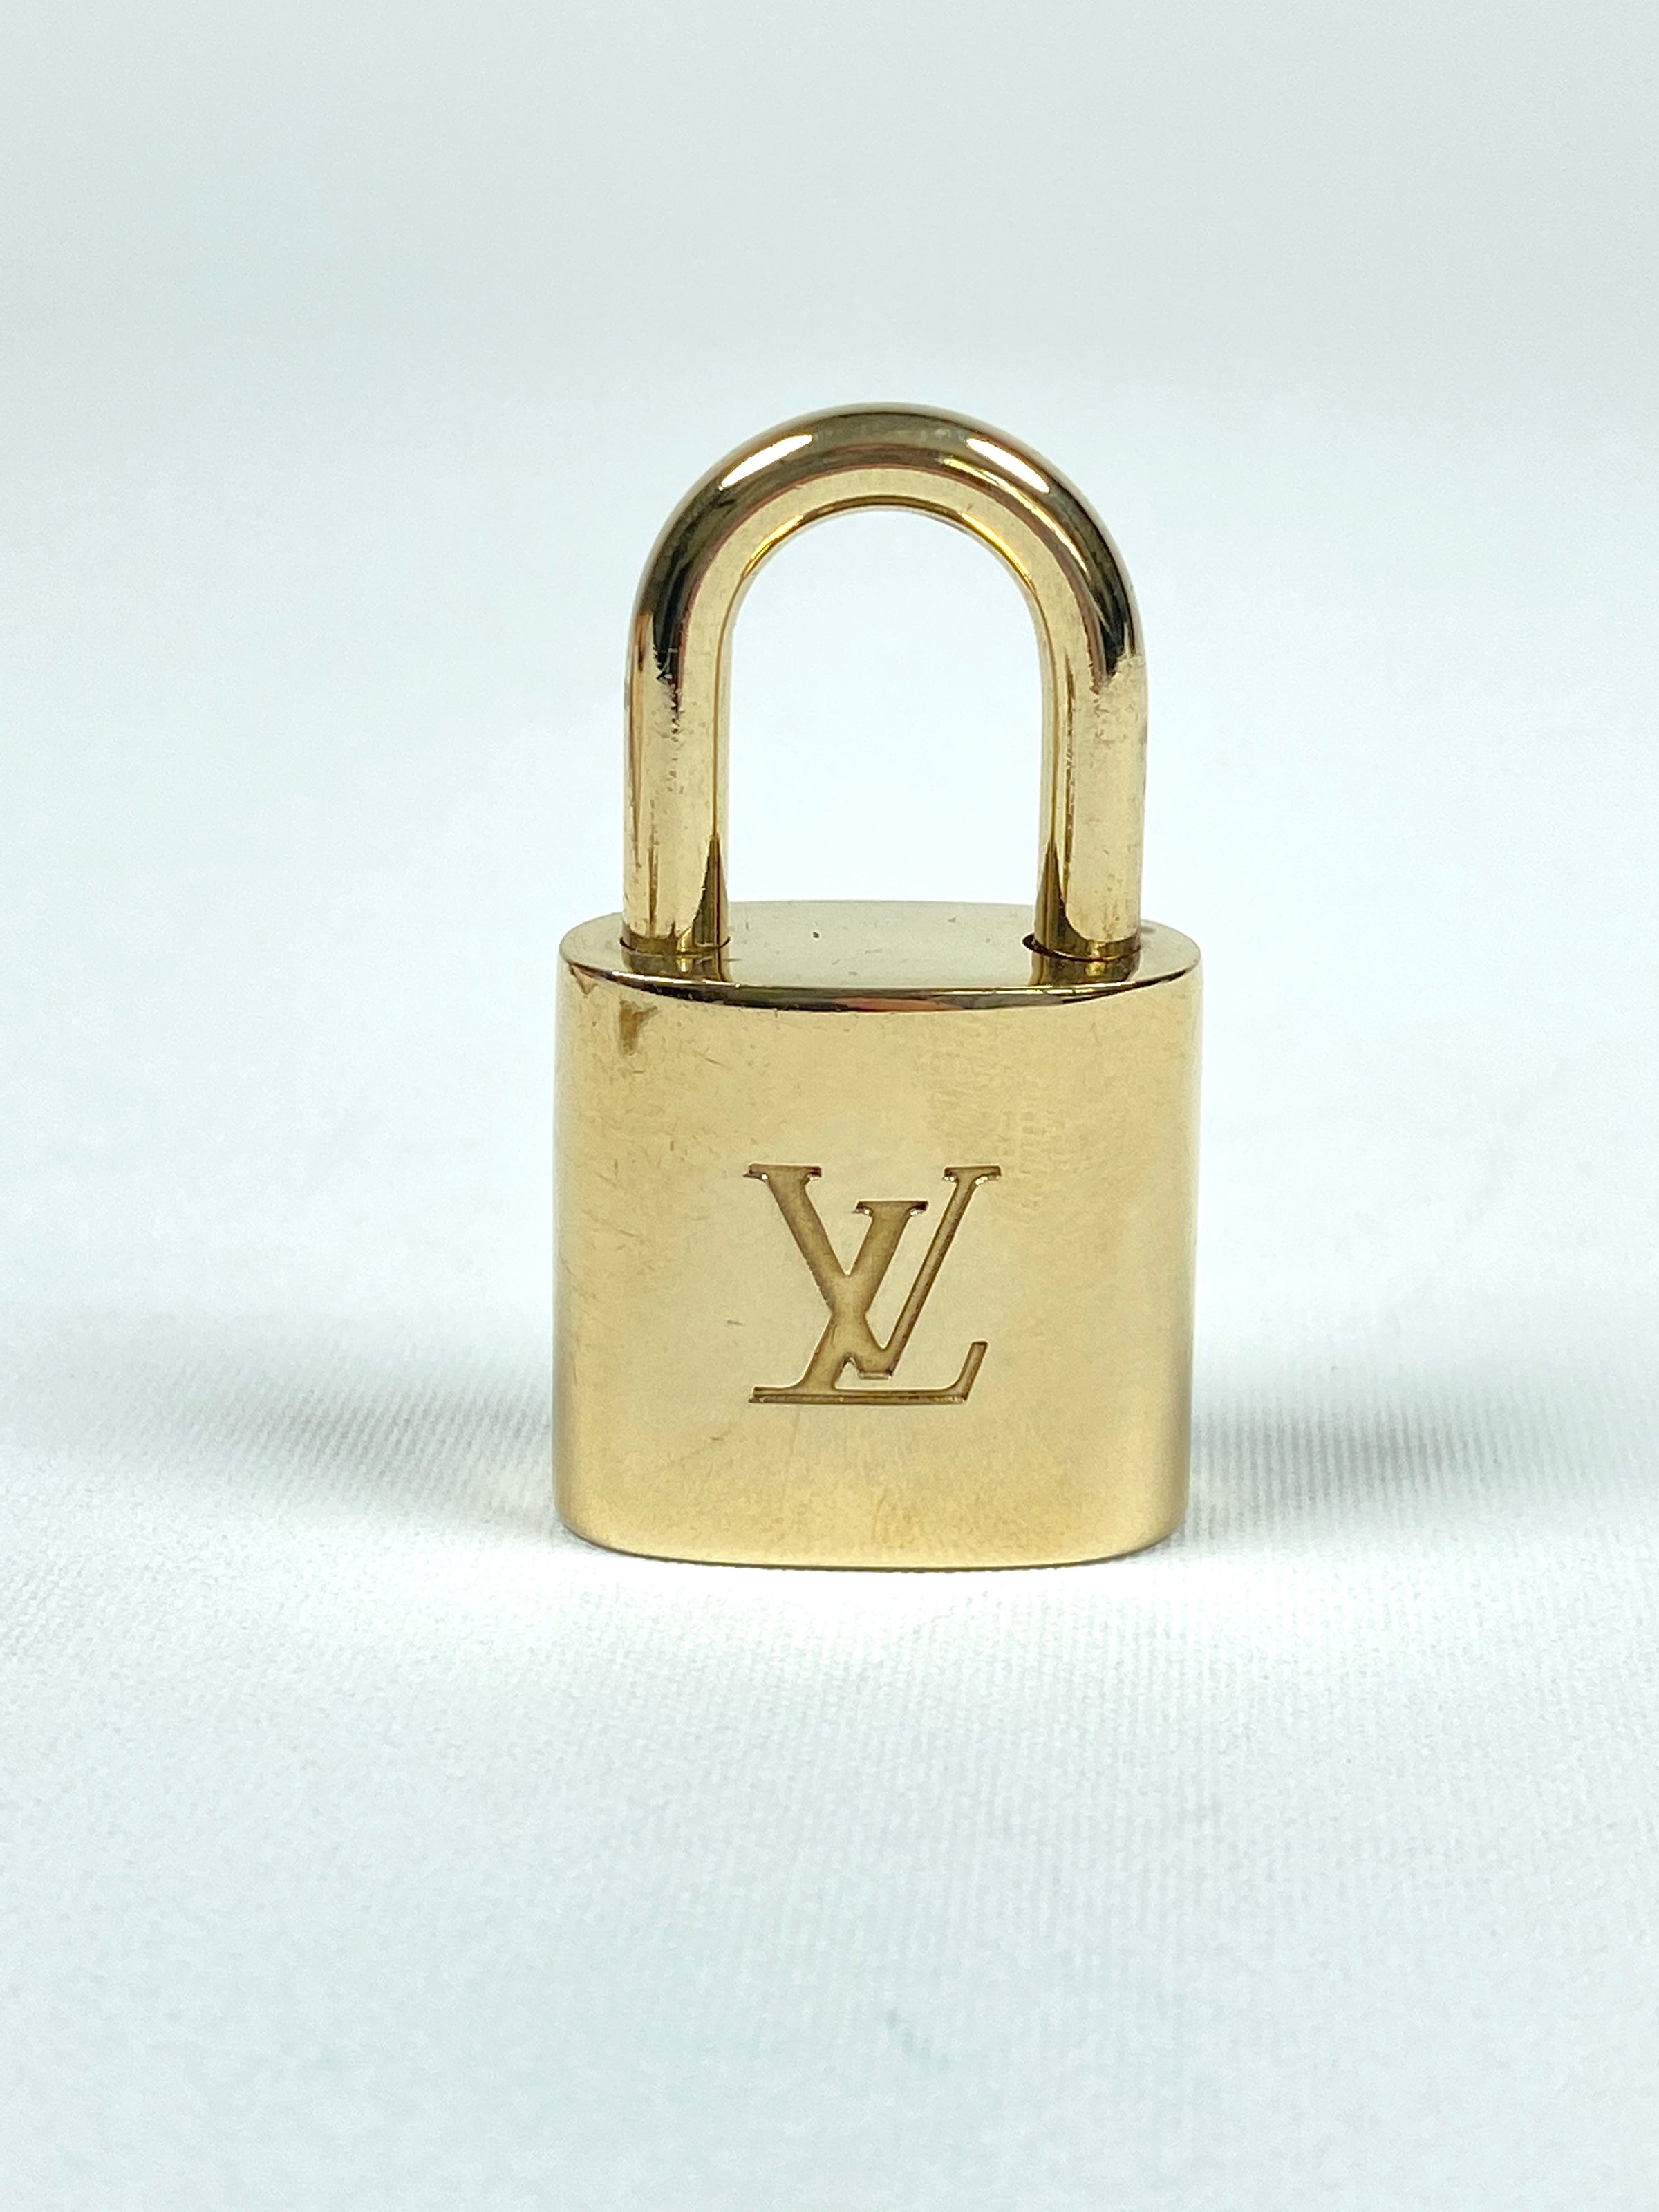 Buy Authentic Louis Vuitton Gold Brass Lock and Key Set 312 Online